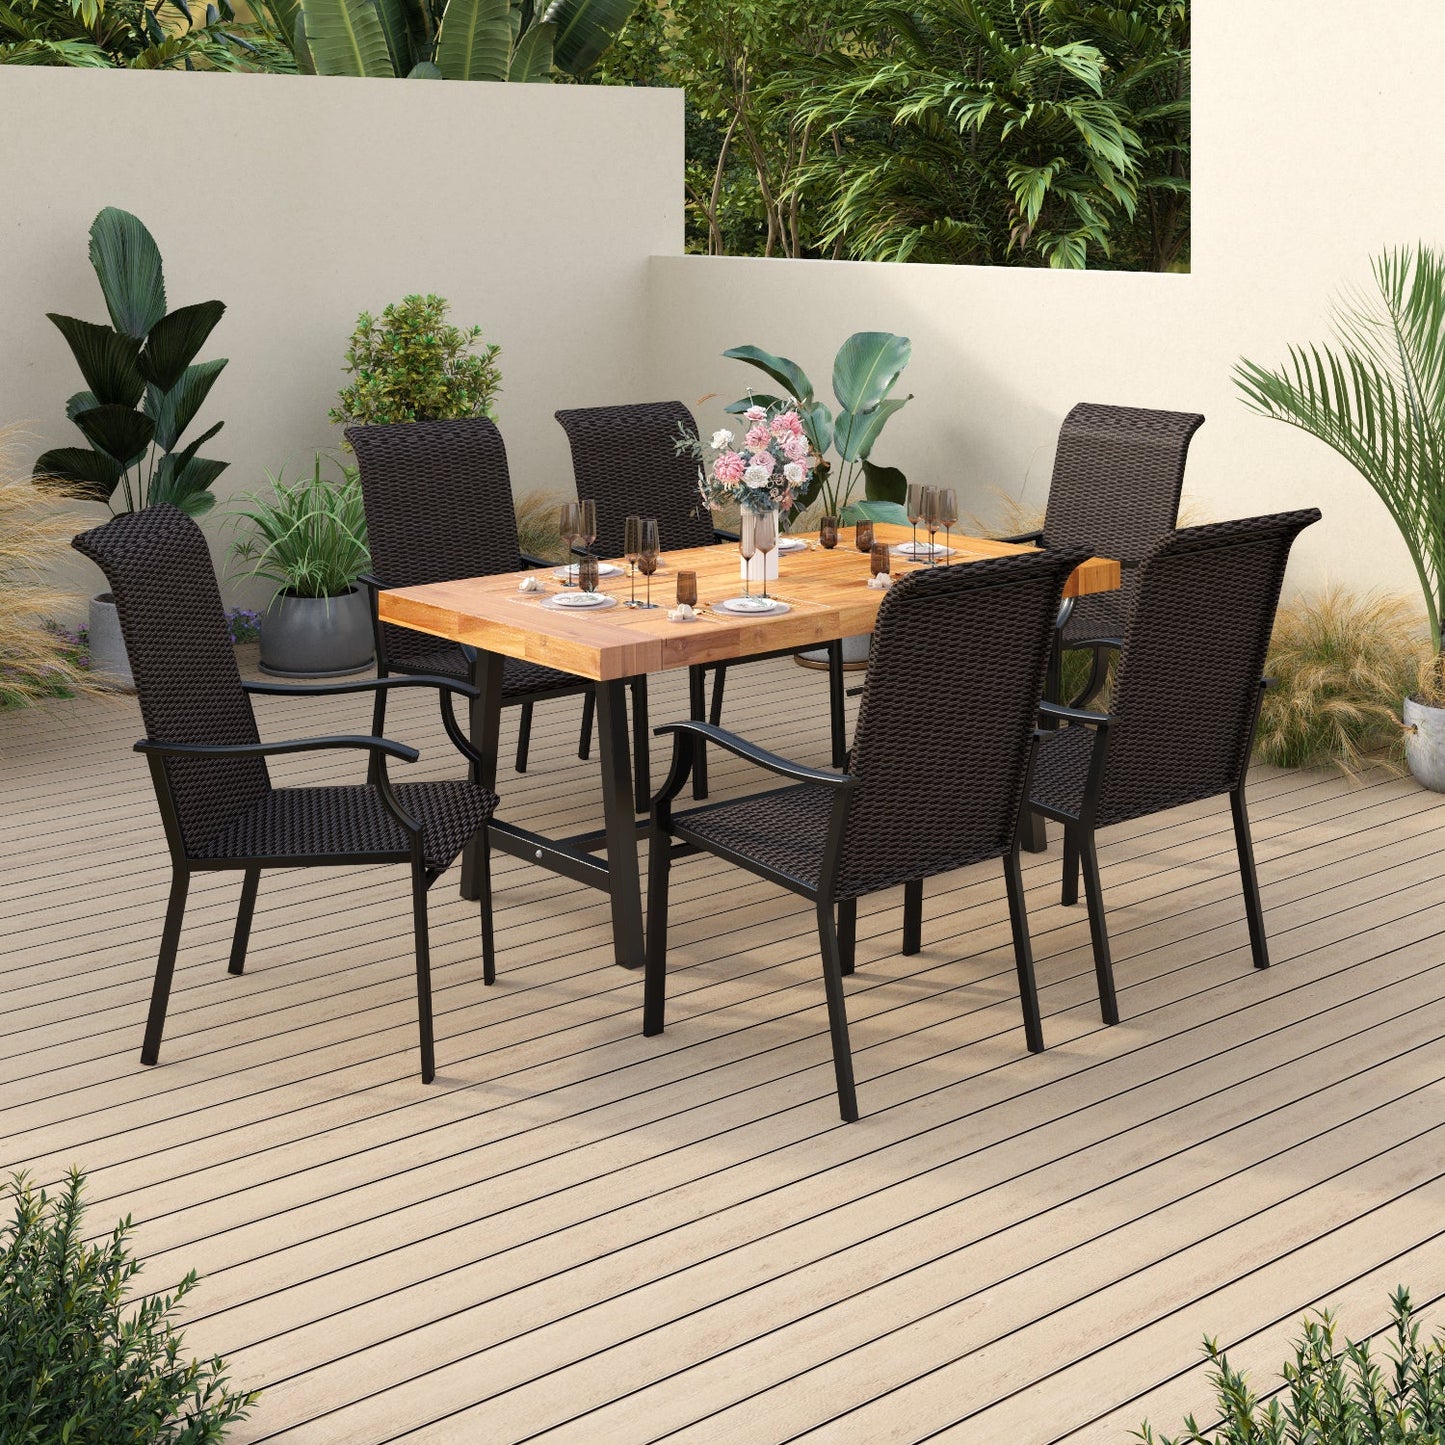 Sophia & William 7 Pieces Outdoor Patio Dining Set High Back Dining Chairs and Patio Metal Dining Table